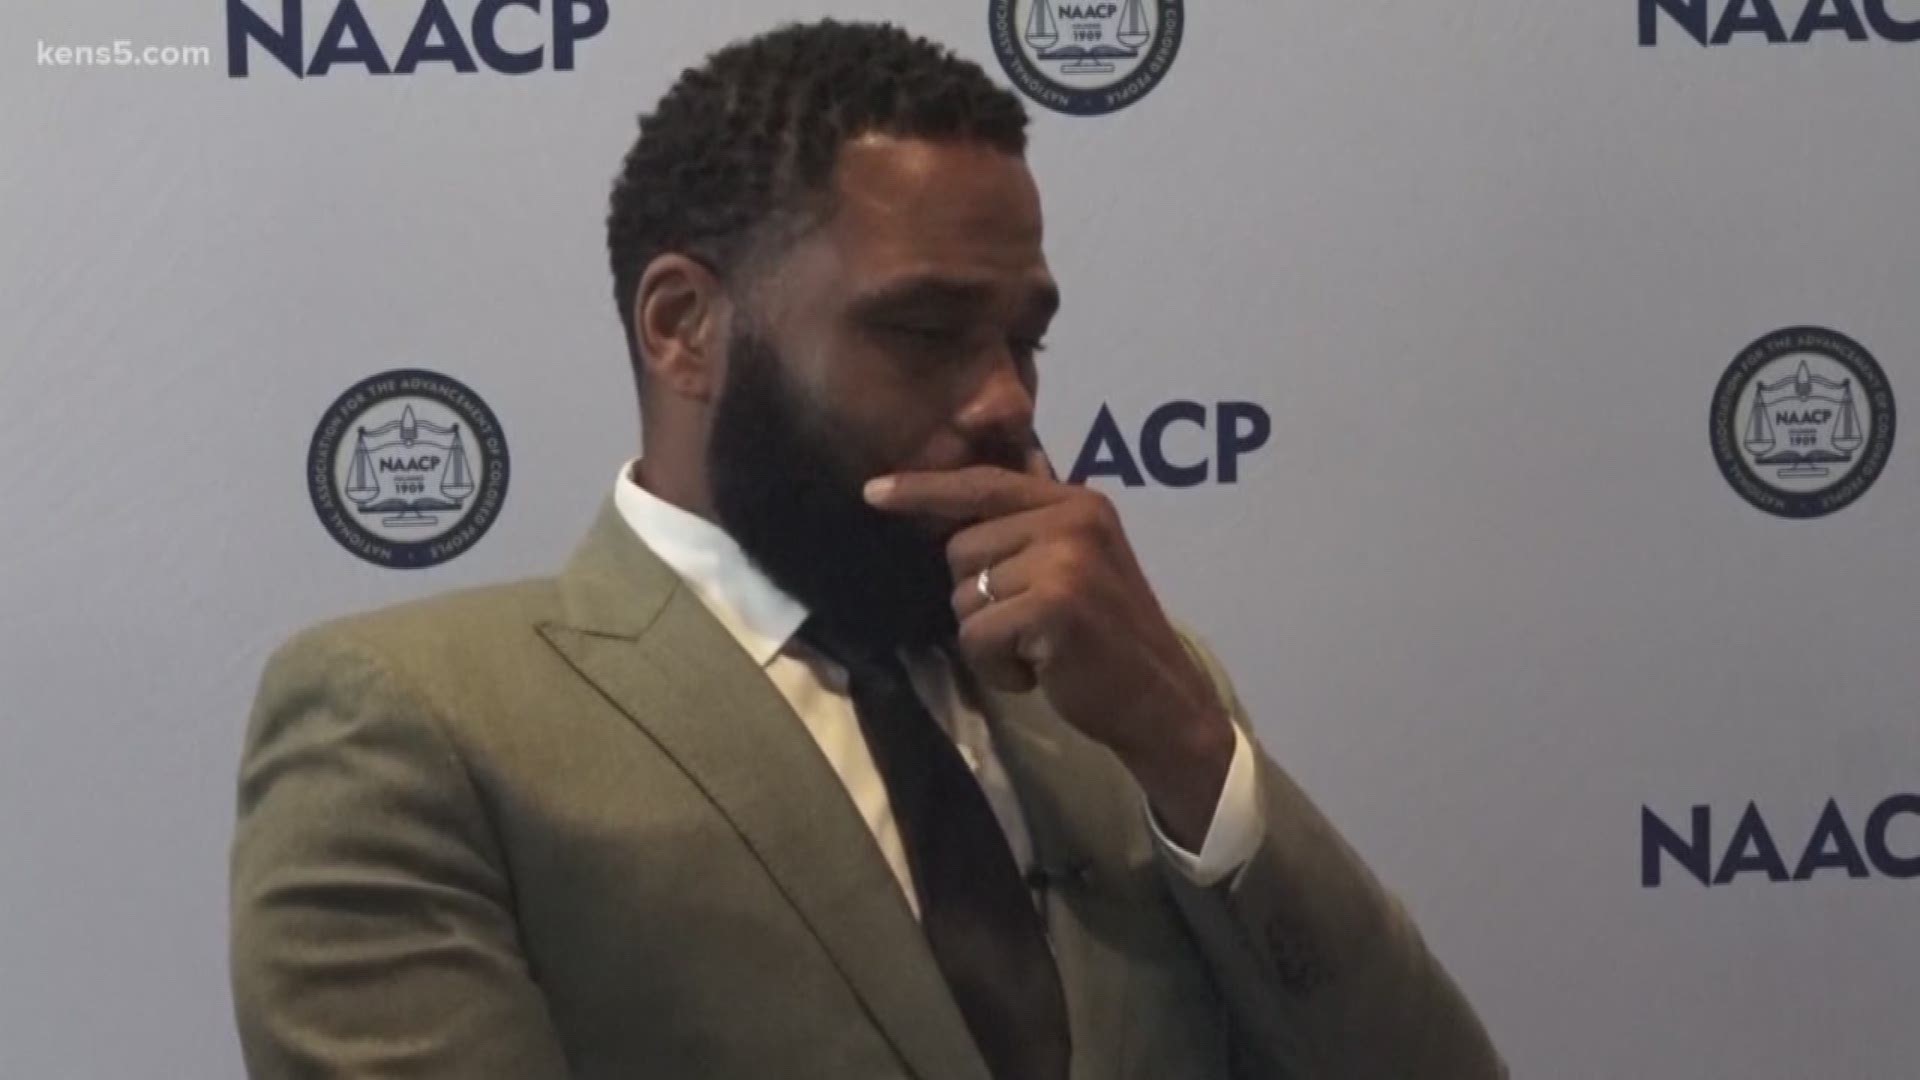 You might know him from "Scary Movie" and his many TV shows, but actor Anthony Anderson is in town for the NAACP convention to talk about his personal struggle with diabetes. Eyewitness News reporter Jeremy Baker has more.